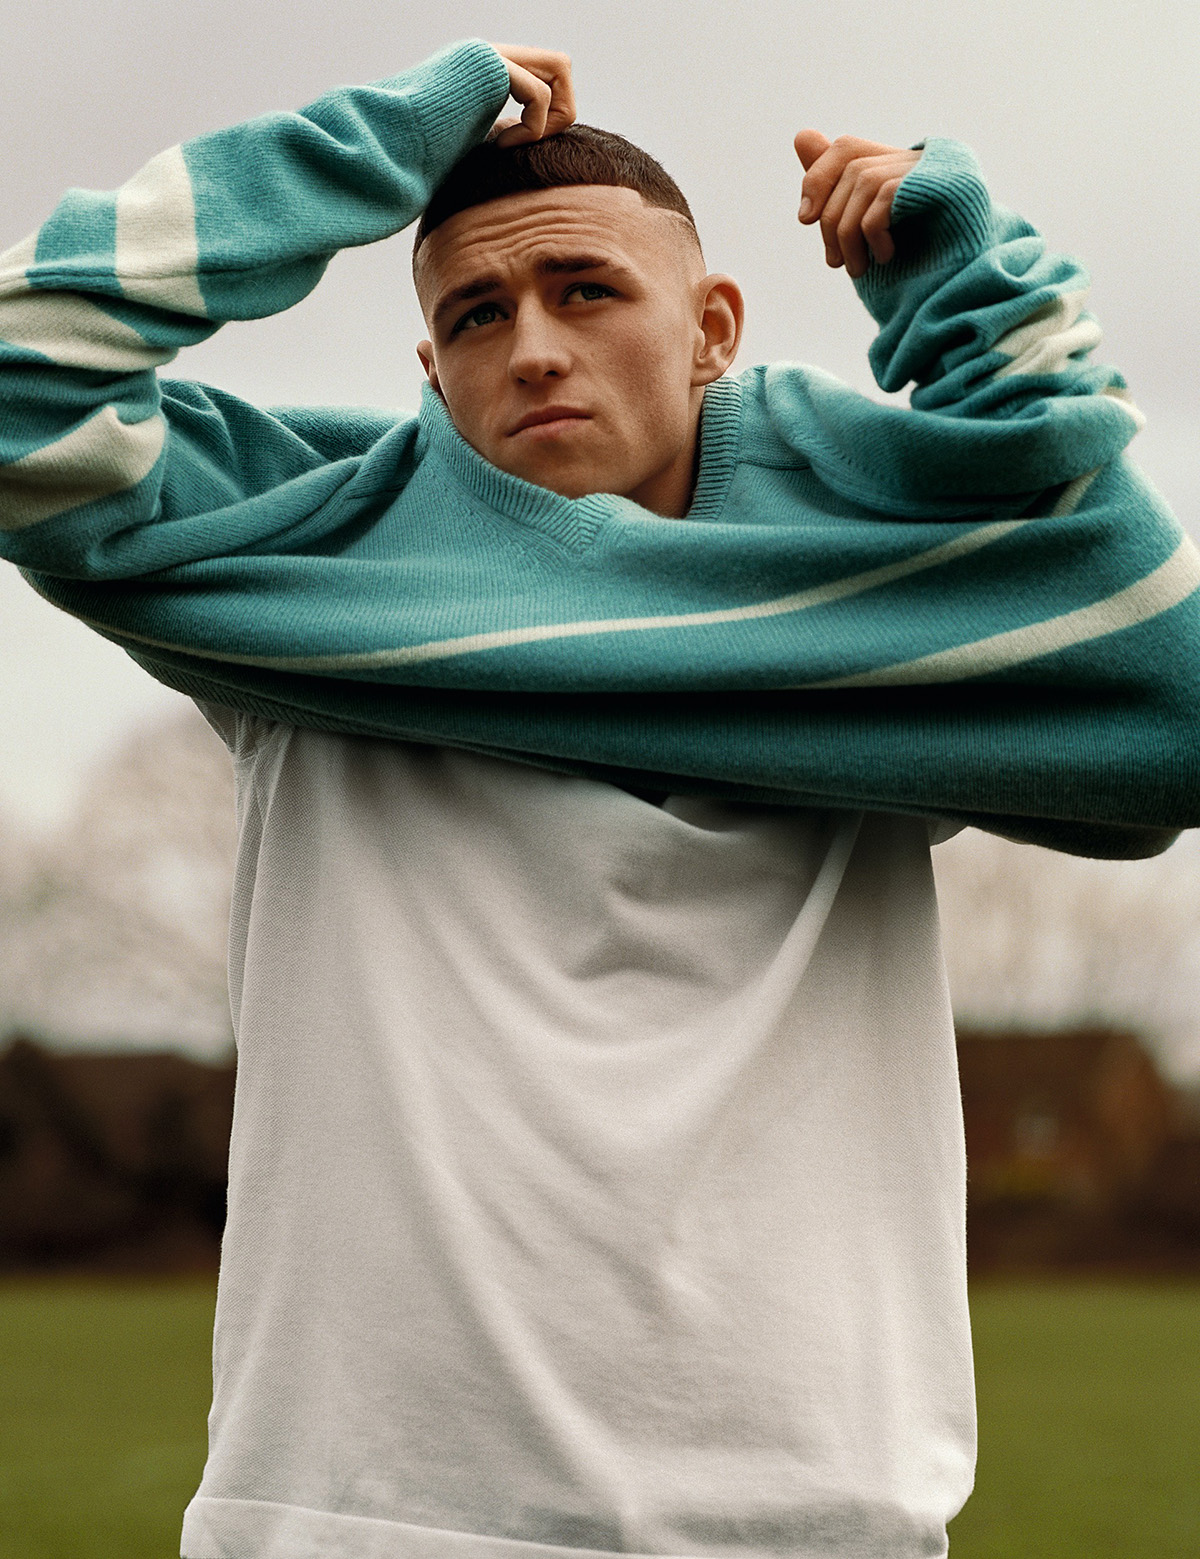 Phil Foden covers i-D Magazine Issue 363 by Alasdair McLellan